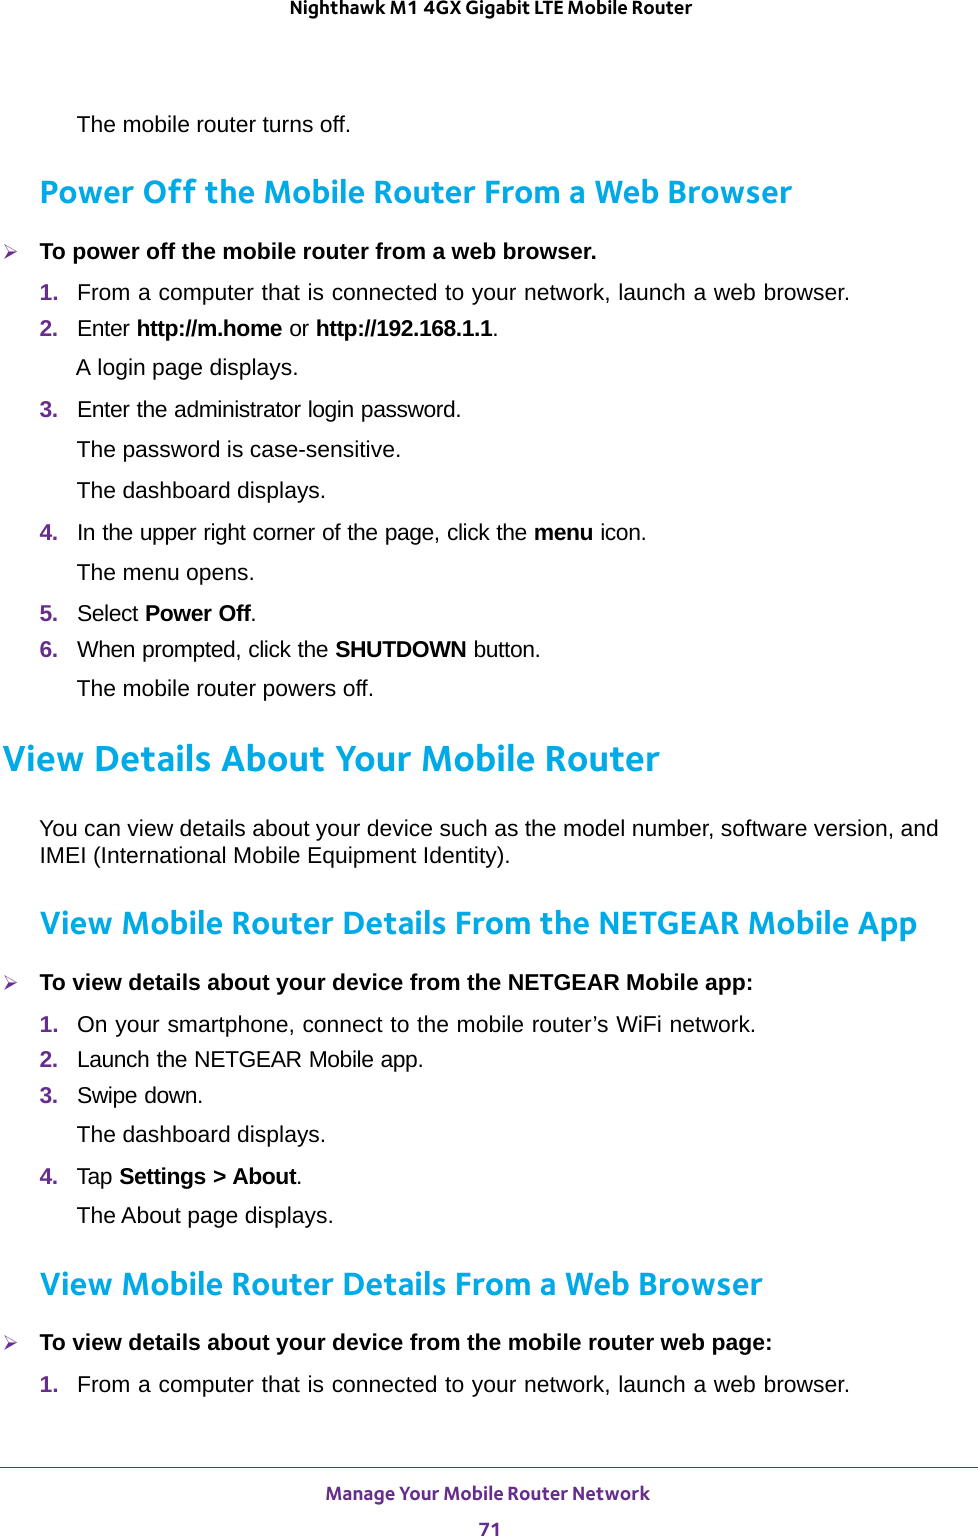 Manage Your Mobile Router Network 71 Nighthawk M1 4GX Gigabit LTE Mobile RouterThe mobile router turns off.Power Off the Mobile Router From a Web BrowserTo power off the mobile router from a web browser.1.  From a computer that is connected to your network, launch a web browser.2.  Enter http://m.home or http://192.168.1.1.A login page displays.3.  Enter the administrator login password.The password is case-sensitive.The dashboard displays.4.  In the upper right corner of the page, click the menu icon.The menu opens.5.  Select Power Off.6.  When prompted, click the SHUTDOWN button.The mobile router powers off.View Details About Your Mobile RouterYou can view details about your device such as the model number, software version, and IMEI (International Mobile Equipment Identity).View Mobile Router Details From the NETGEAR Mobile AppTo view details about your device from the NETGEAR Mobile app:1.  On your smartphone, connect to the mobile router’s WiFi network.2.  Launch the NETGEAR Mobile app.3.  Swipe down.The dashboard displays.4.  Tap Settings &gt; About.The About page displays.View Mobile Router Details From a Web BrowserTo view details about your device from the mobile router web page:1.  From a computer that is connected to your network, launch a web browser.